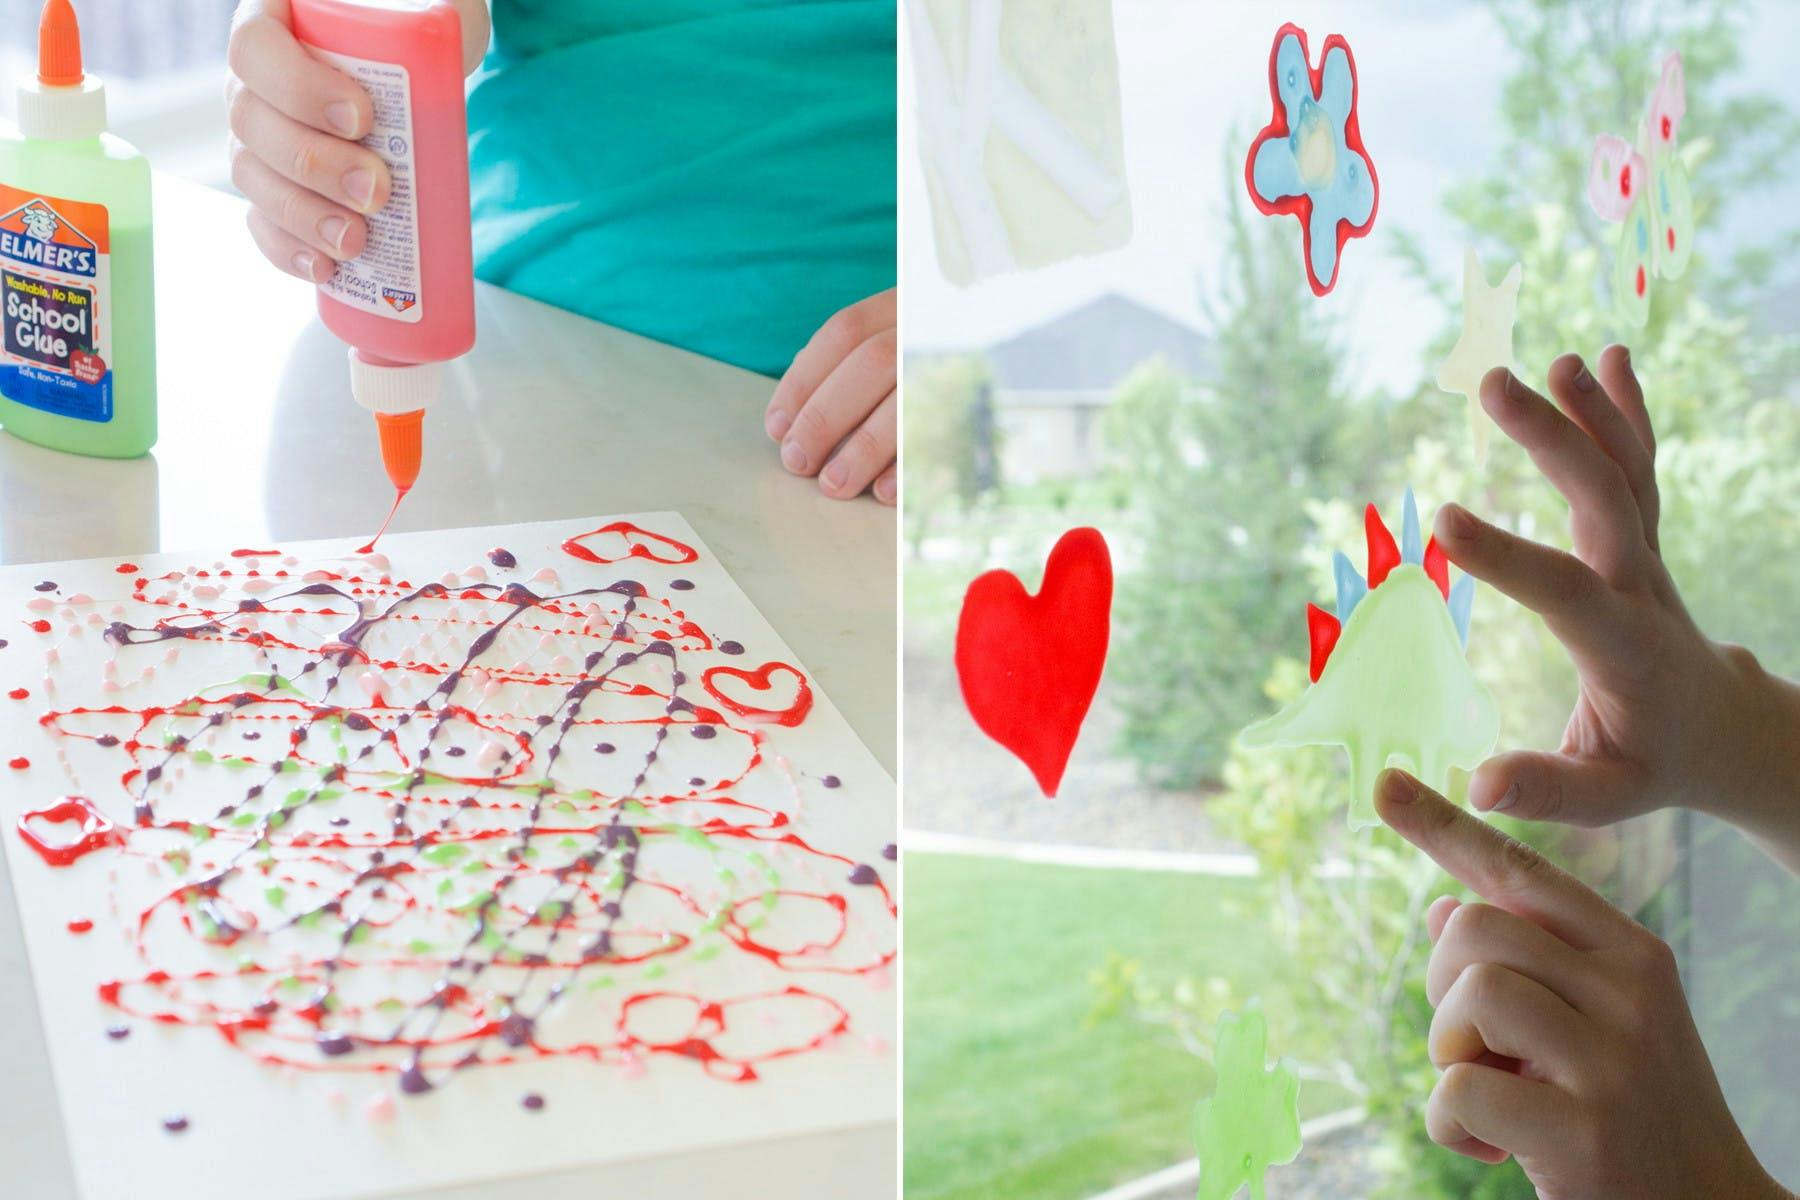 A child squeezing koolaid glue mixture onto some paper, and applying the finished clings to the window